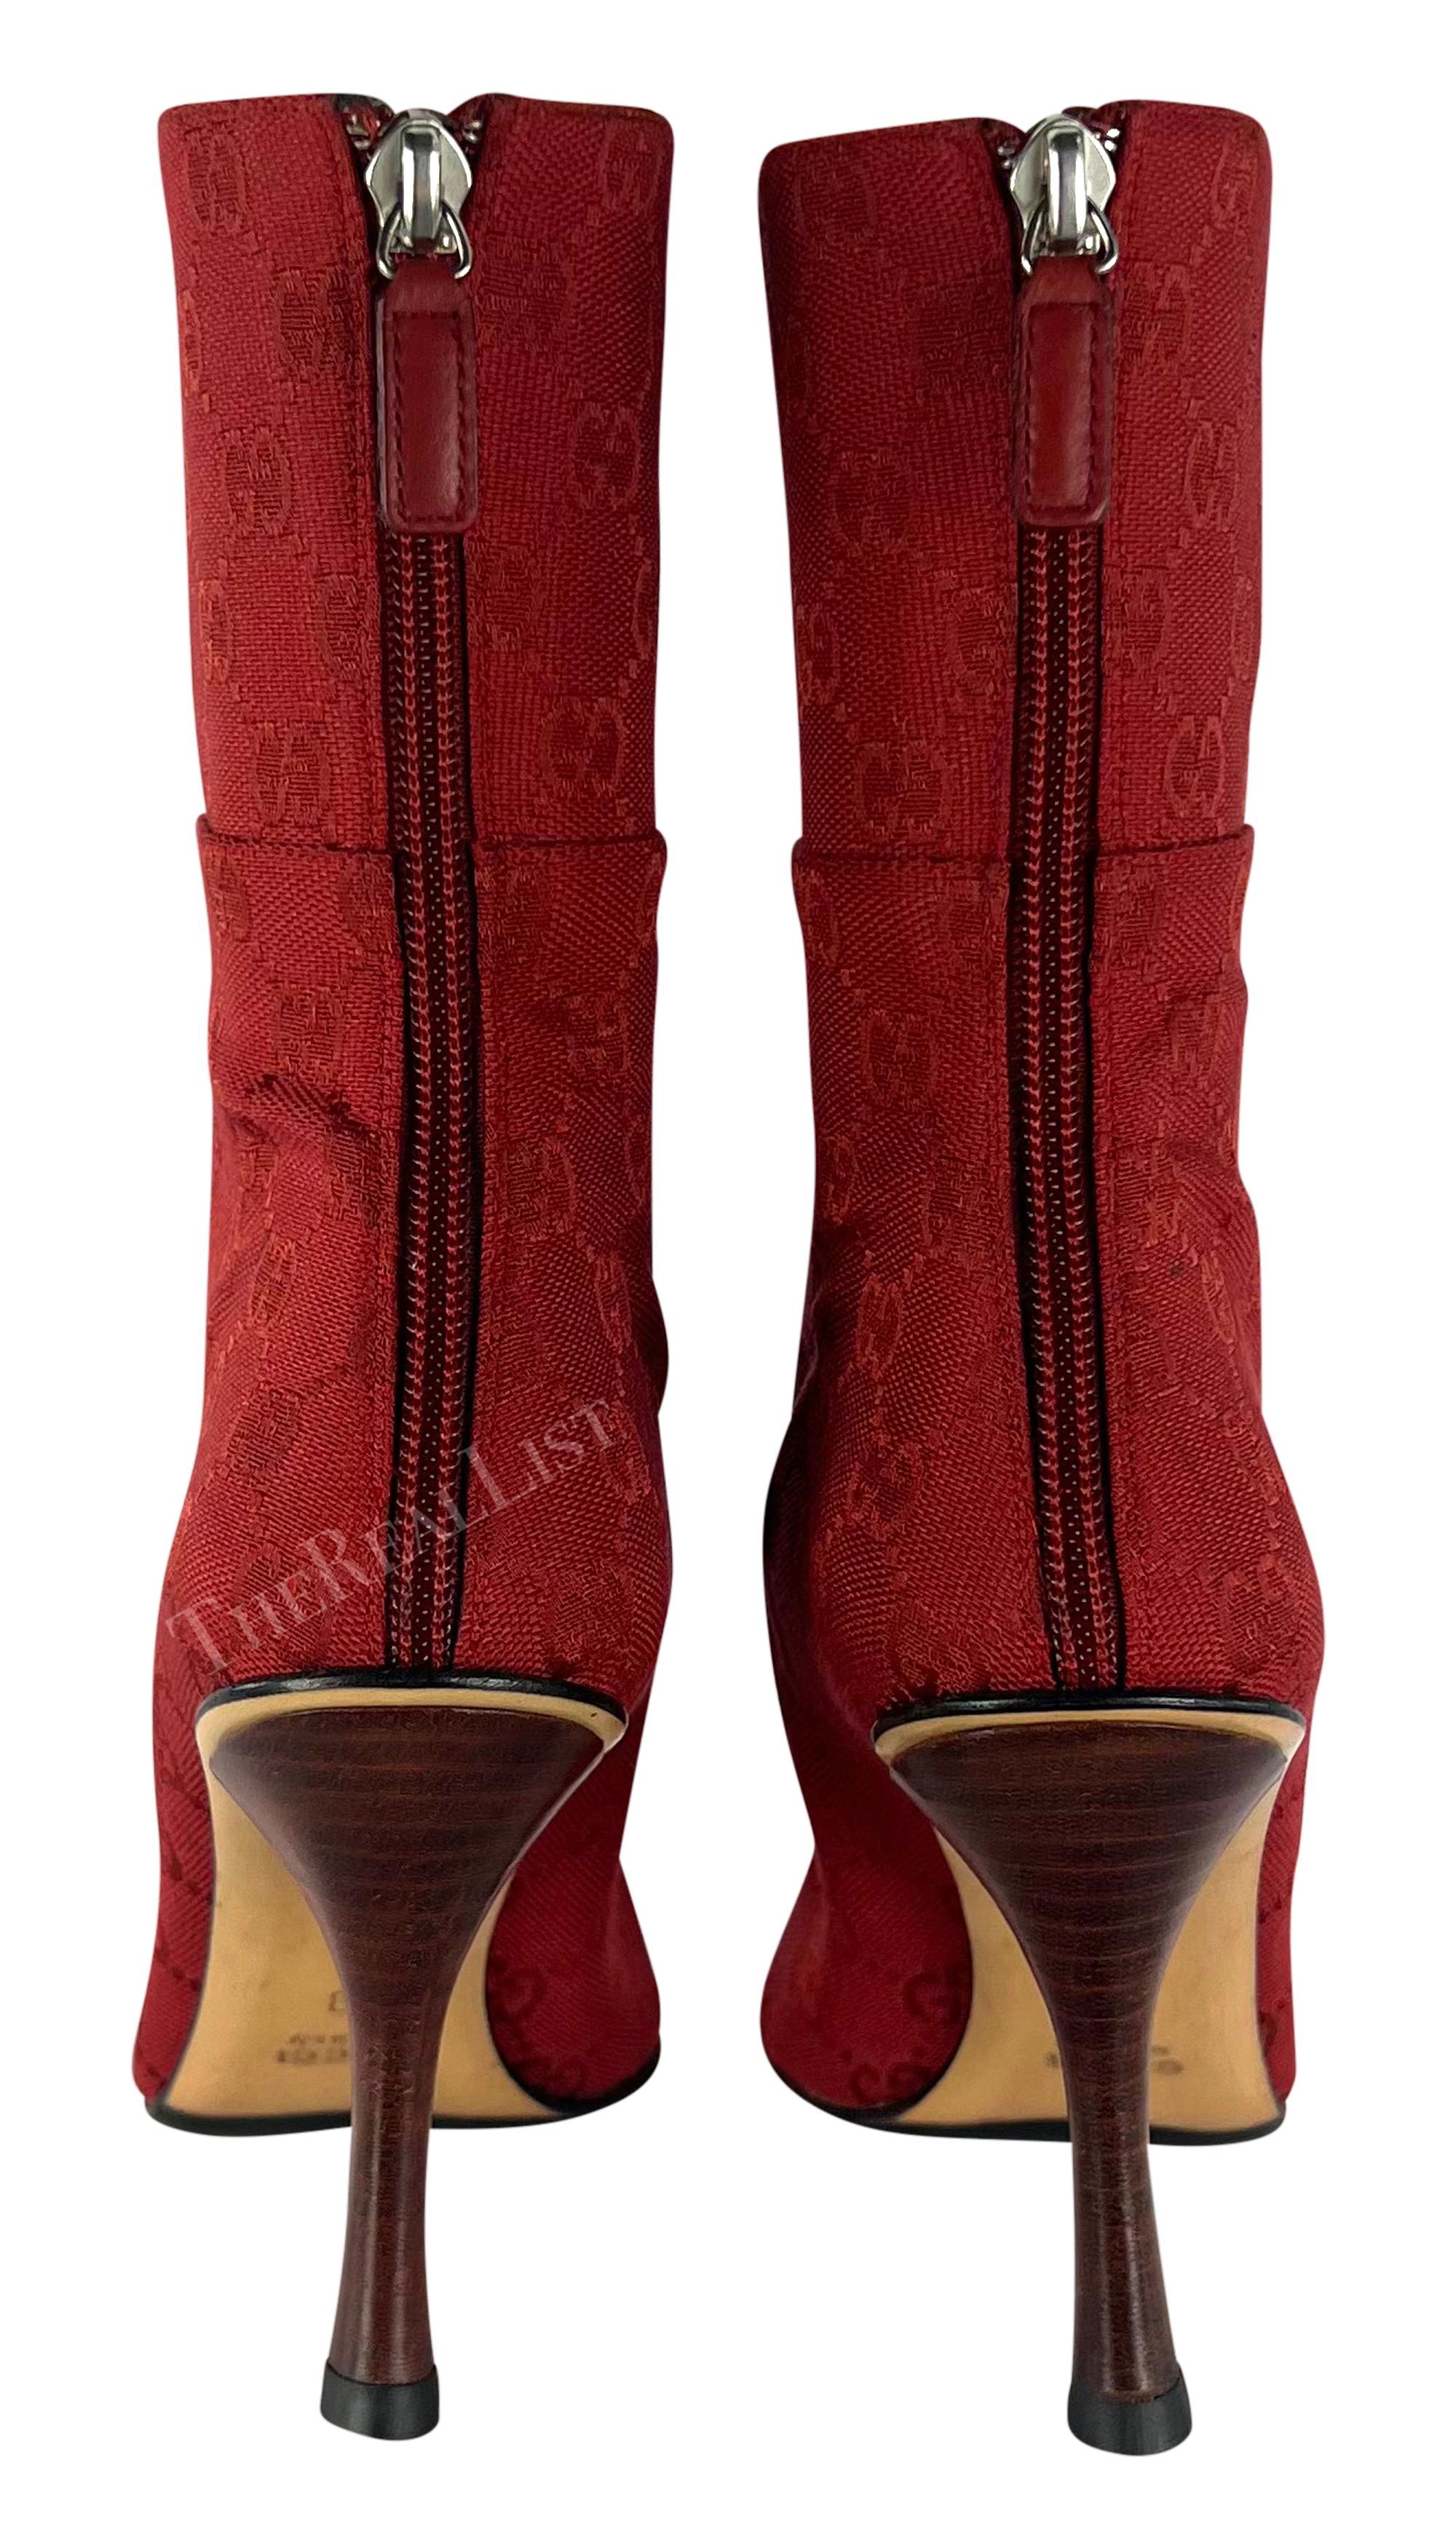 Early 2000s Gucci by Tom Ford Red 'GG' Canvas Heel Ankle Boots Size 6B For Sale 1